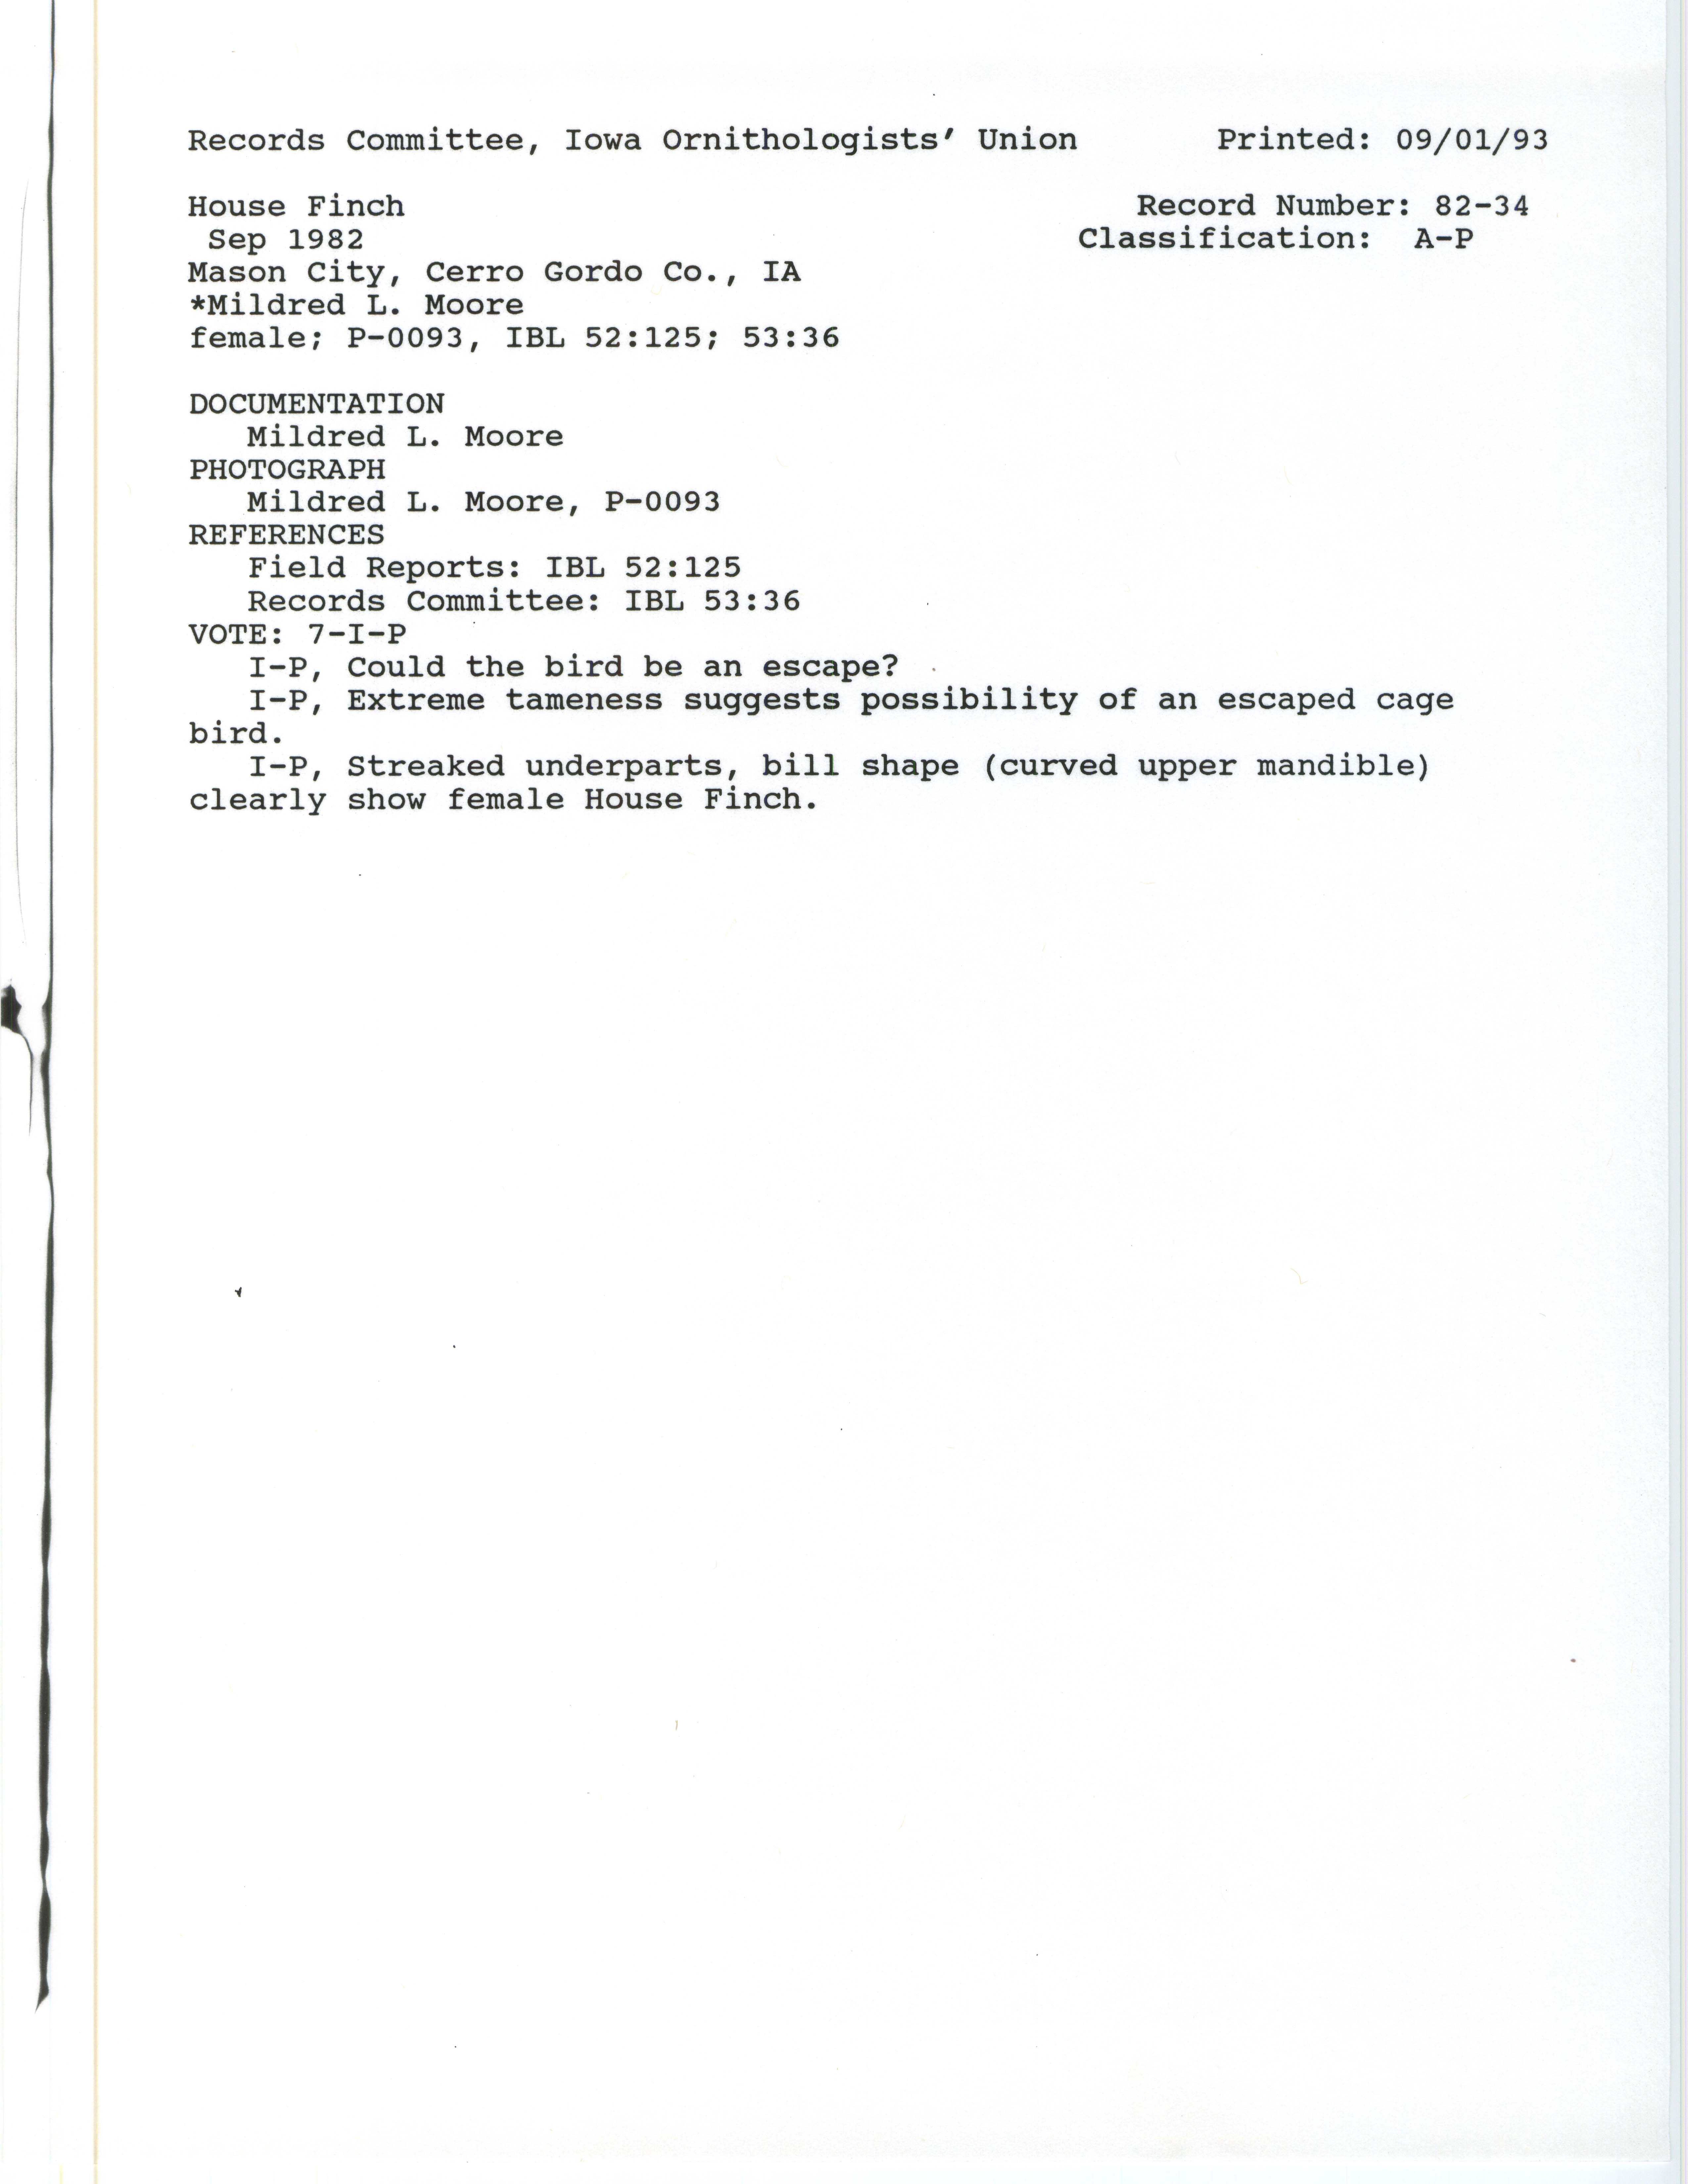 Records Committee review for rare bird sighting for House Finch at Mason City, 1982